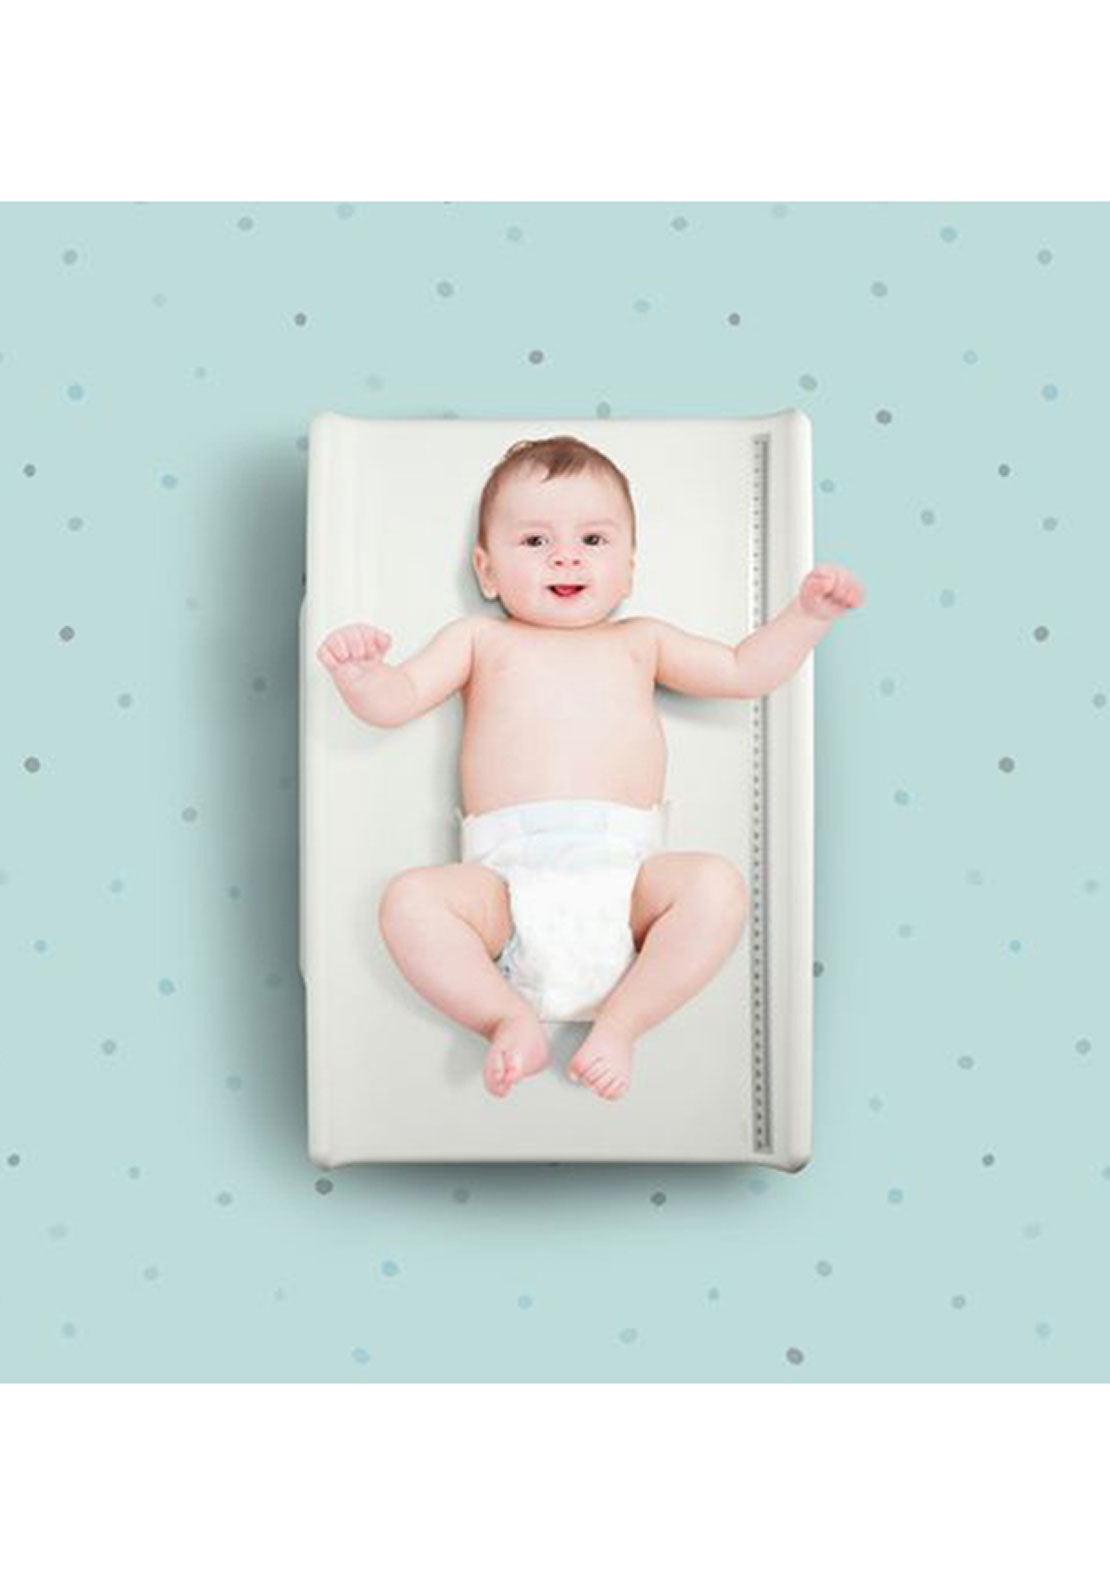 Alecto Baby/Toddler Scale | A003352 Bc10 1 Shaws Department Stores